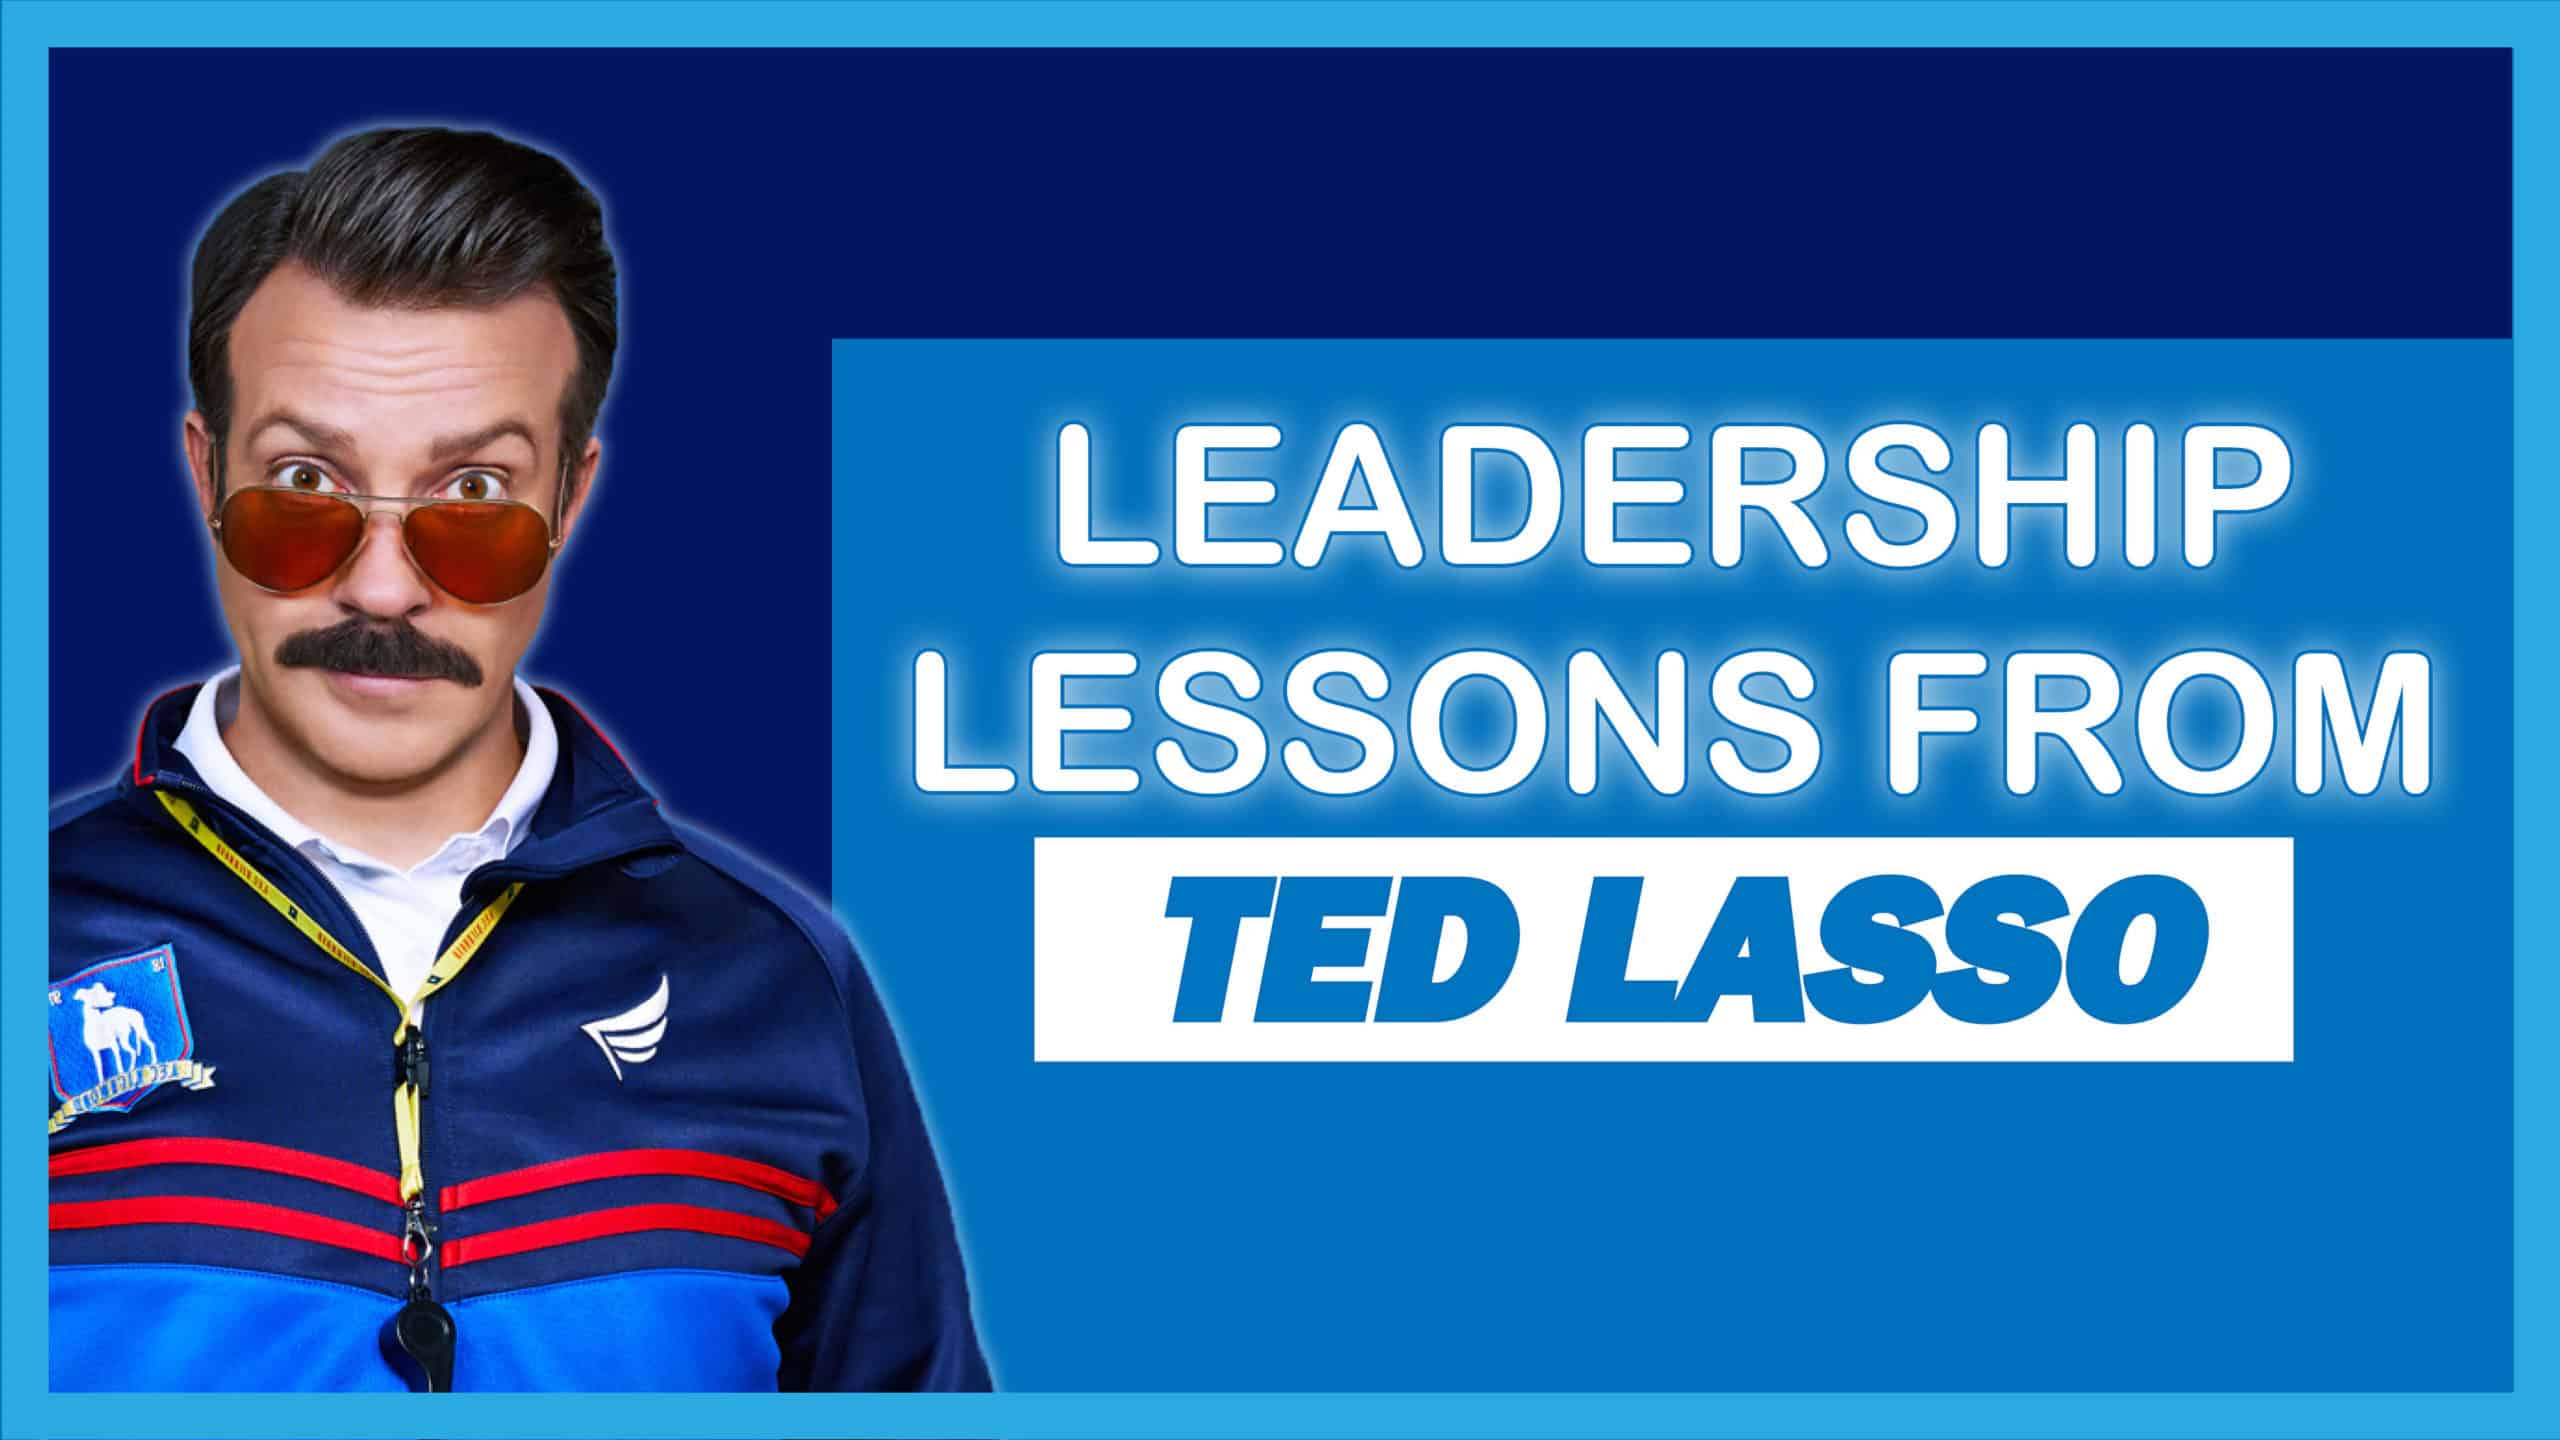 7 Leadership Lessons from Ted Lasso